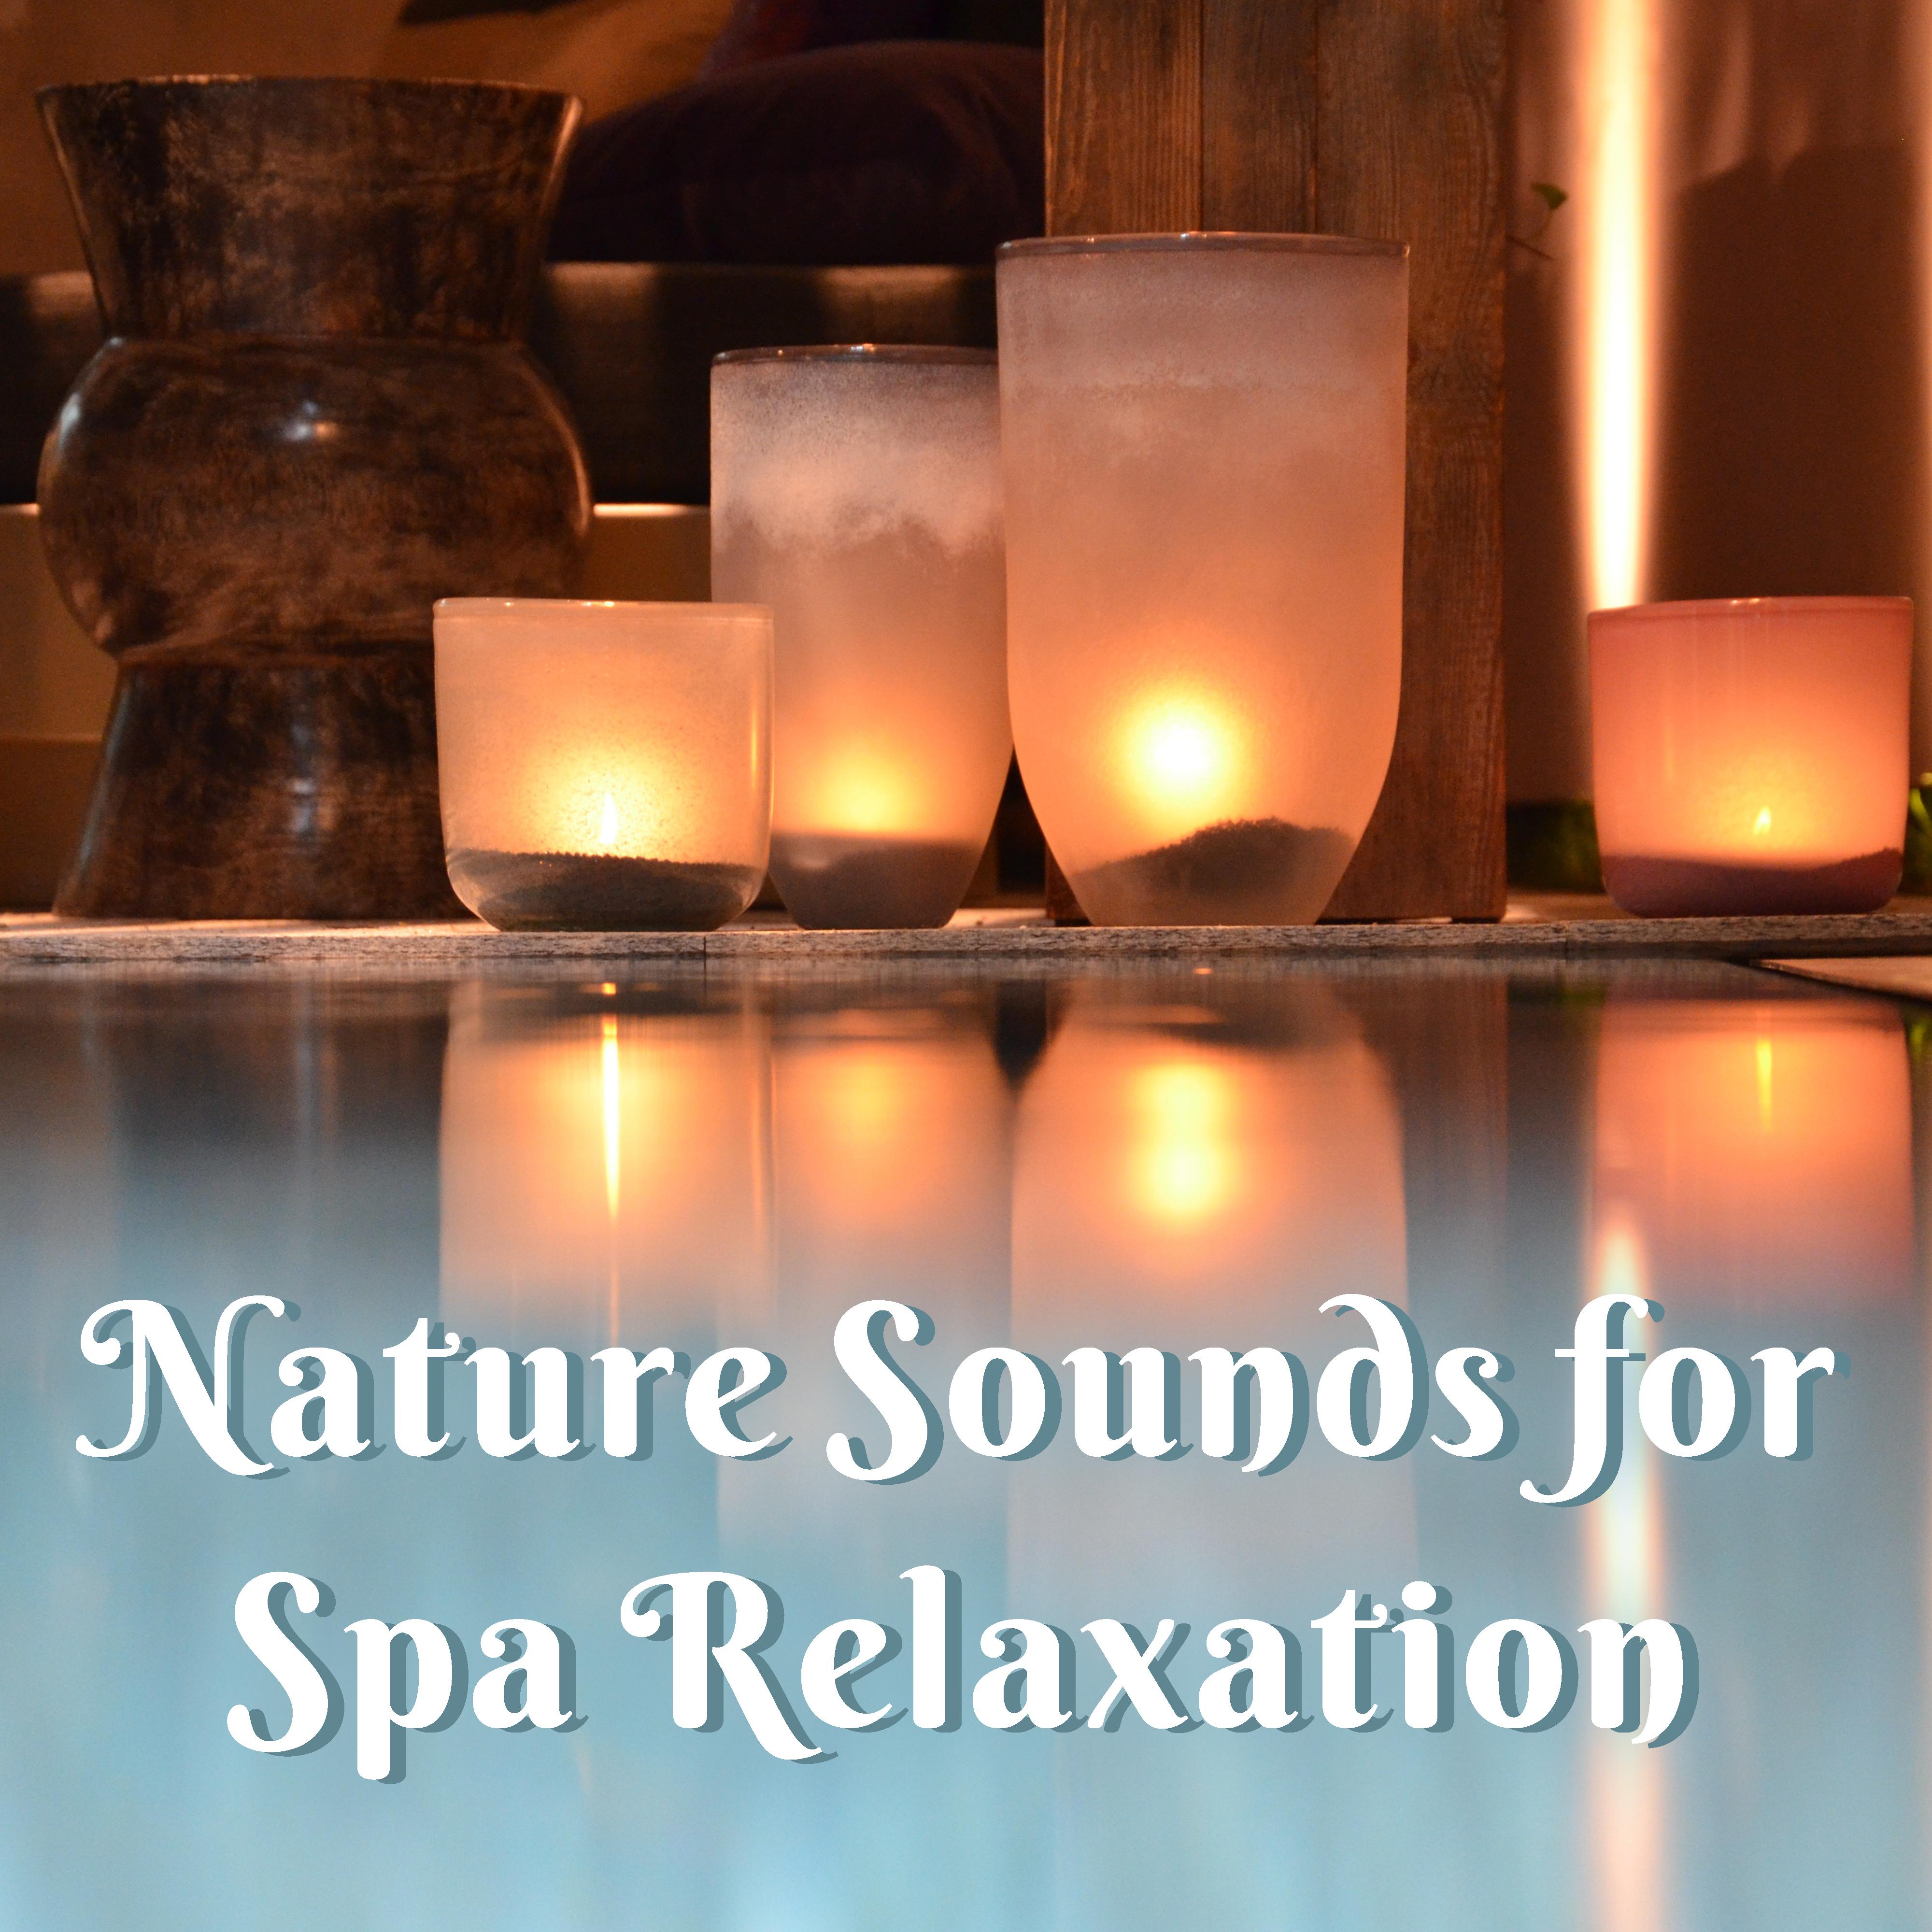 Nature Sounds for Spa Relaxation – Easy Listening, Stress Relief, Spa Beautiful Memories, Soothing Waves